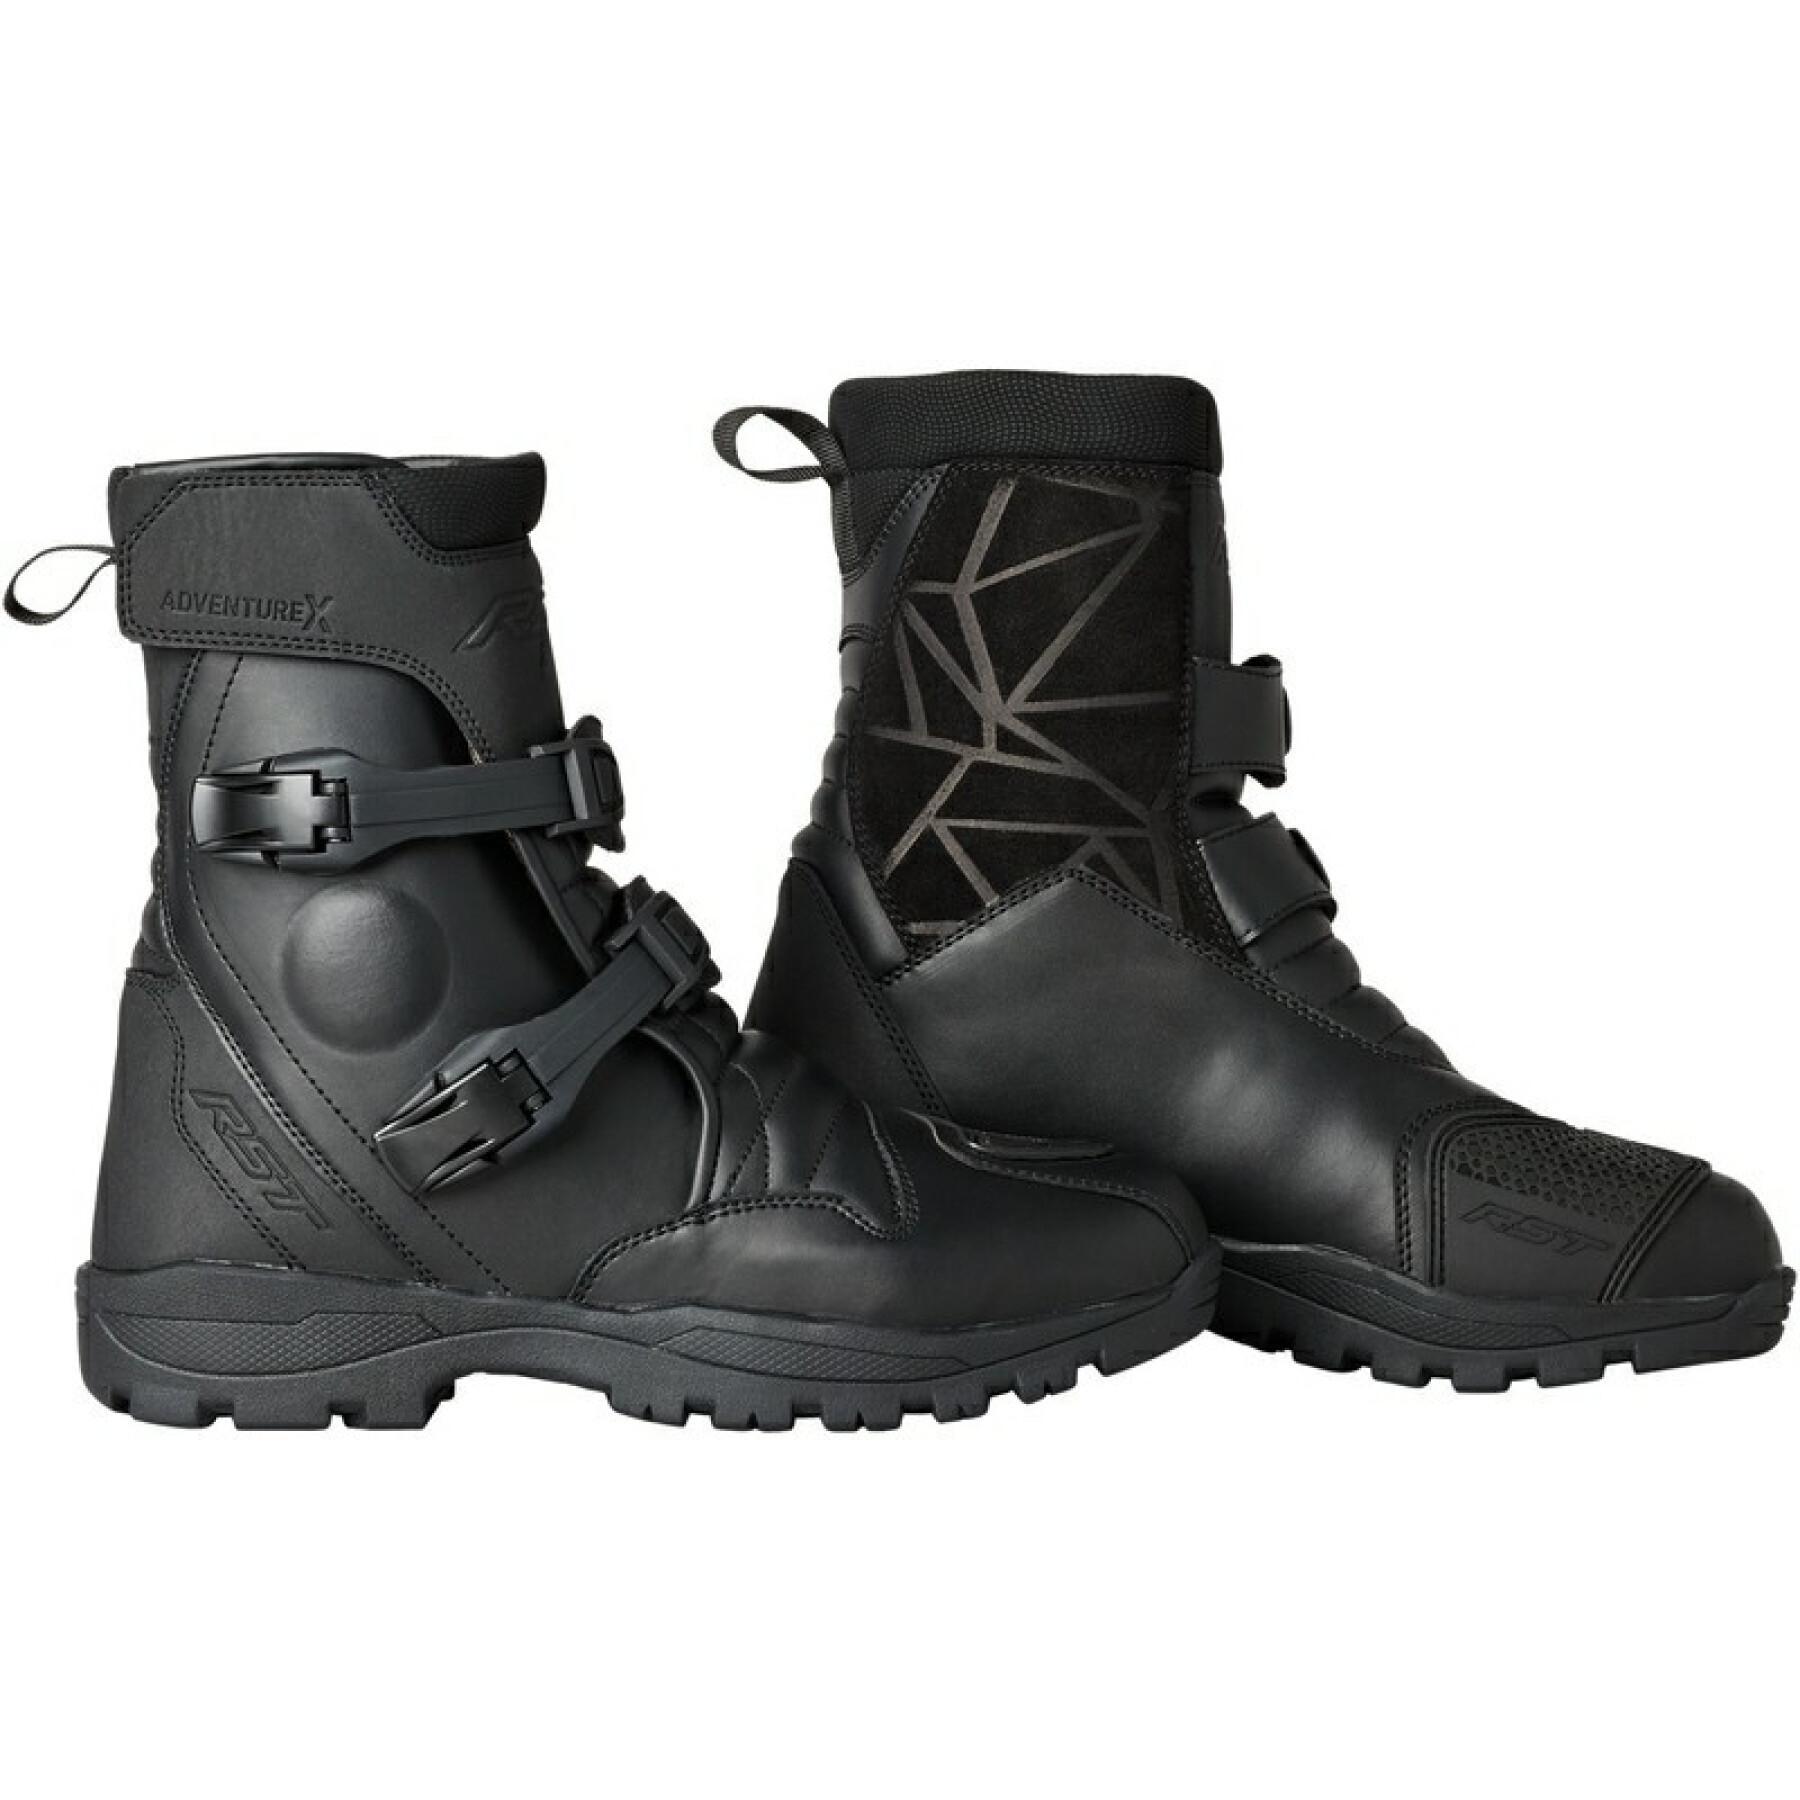 Waterproof motocross boots RST ADV-X mid CE